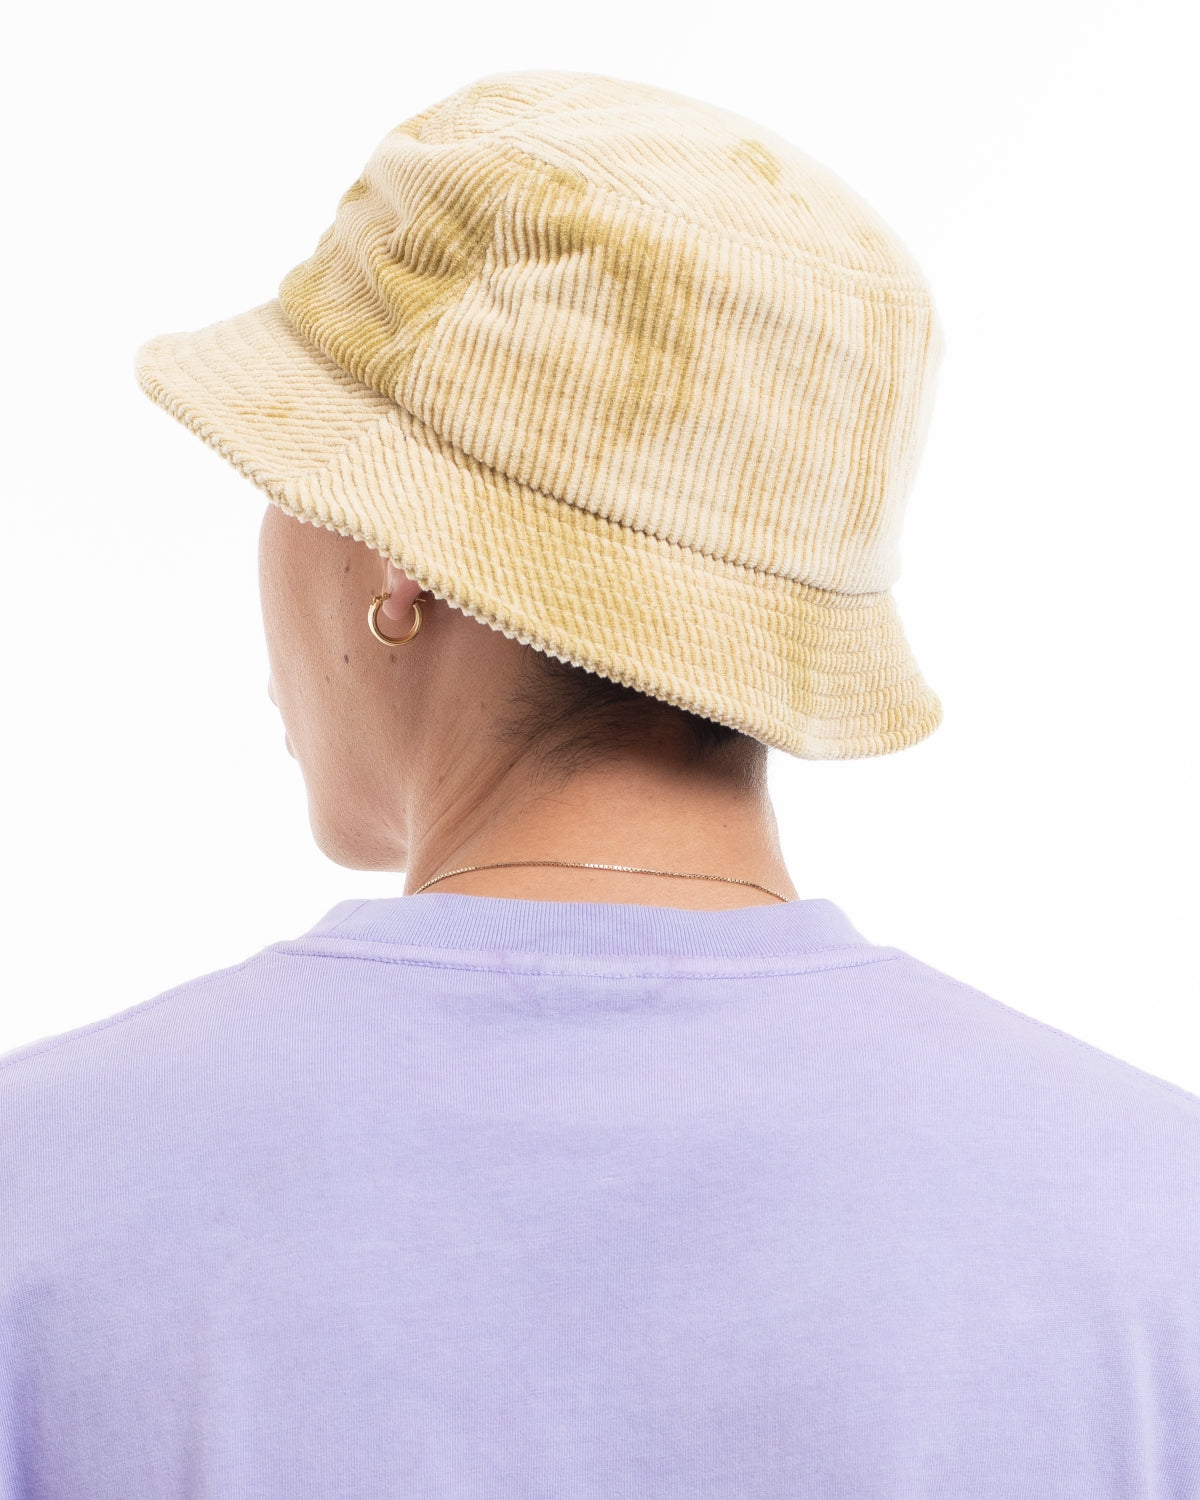 Spikey Bleached Cord Bucket Hat - Gold 6